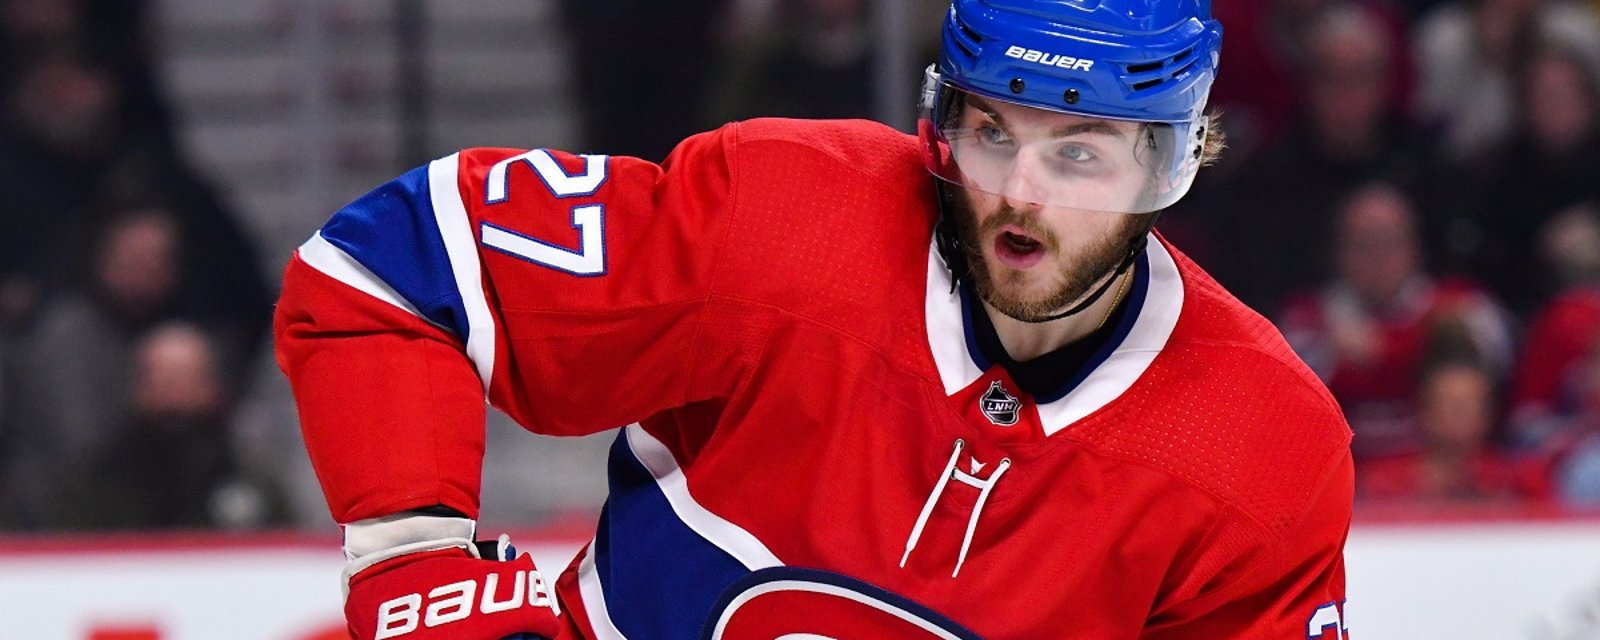 Alex Galchenyuk's career in the NHL appears to be over.